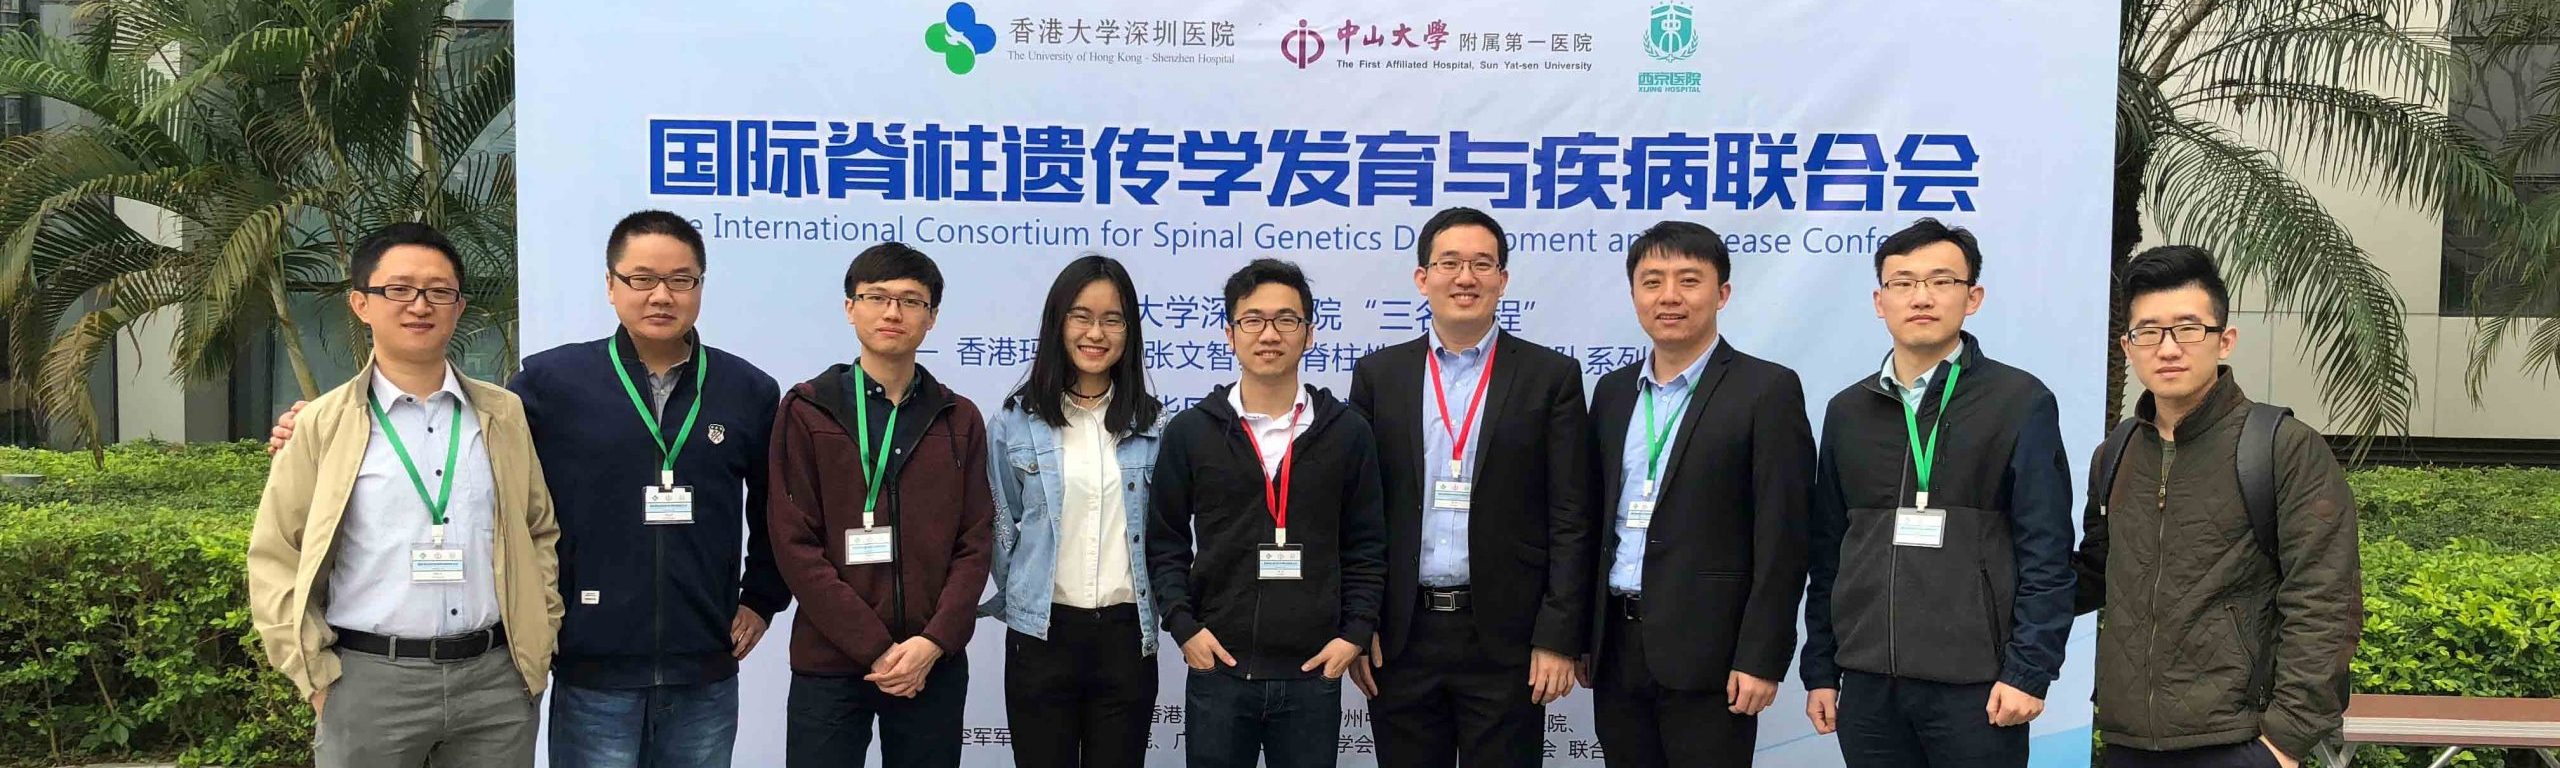 Read more about the article We present DISCO project at the International Consortium for Spinal Genetics, Development and Disease (ICSGDD) meeting, Shenzhen/Guangzhou, China